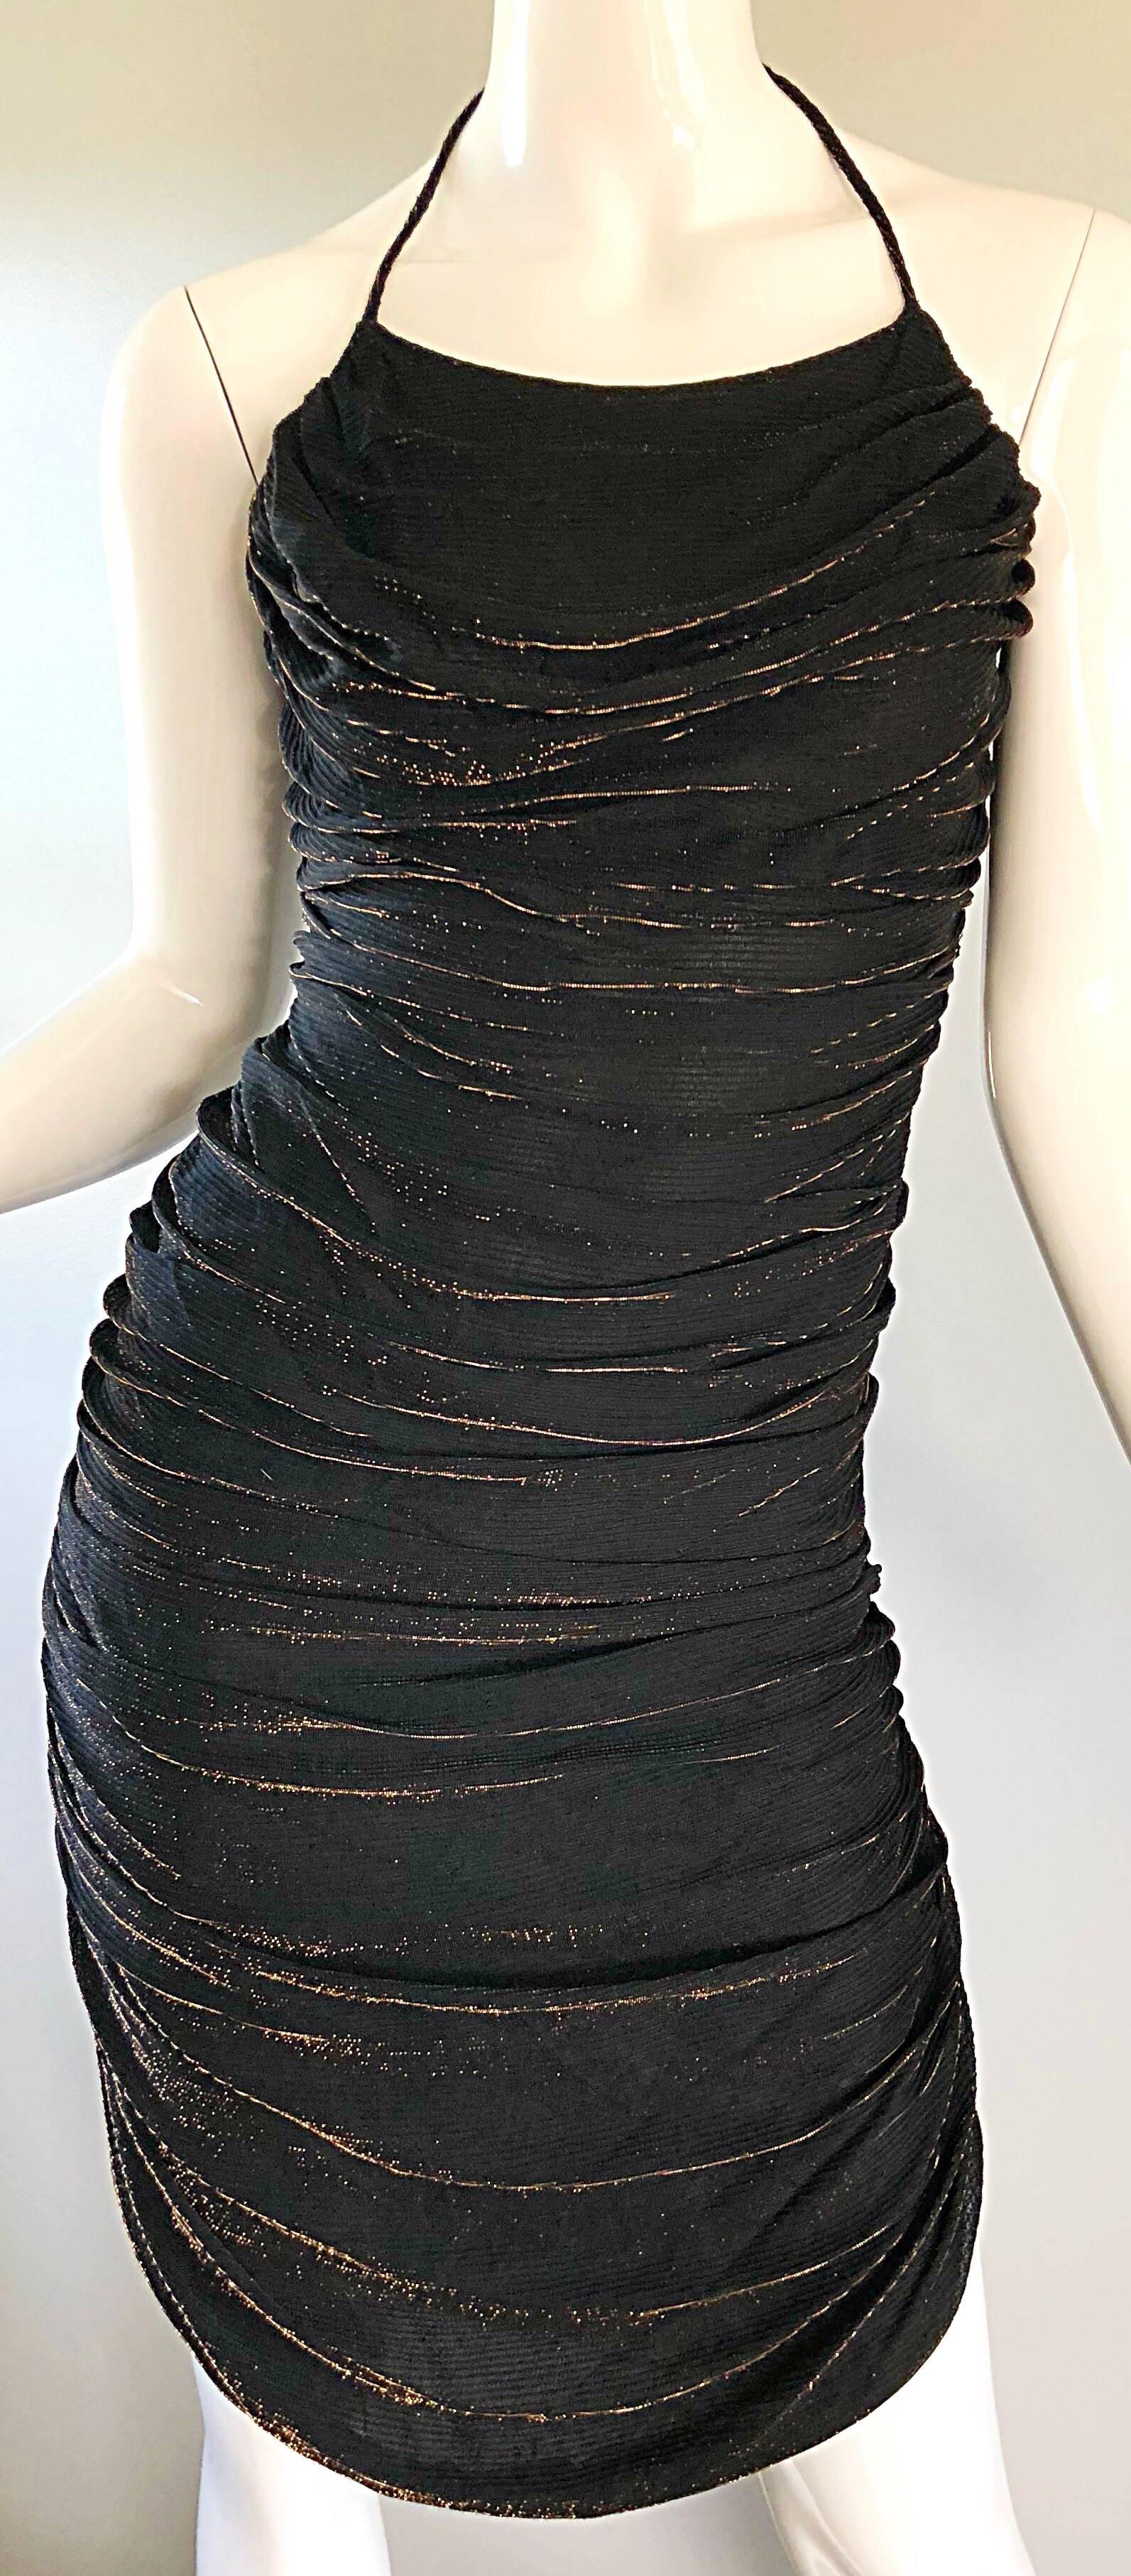 Sexy 1970s SAMIR black and bronze metallic ruched halter dress! Features flattering ruching body that stretches to fit. Body hugging fit looks fantastic on! Hidden zipper up the side. Lots of attention to detail. Great Studio 54 disco party dress,